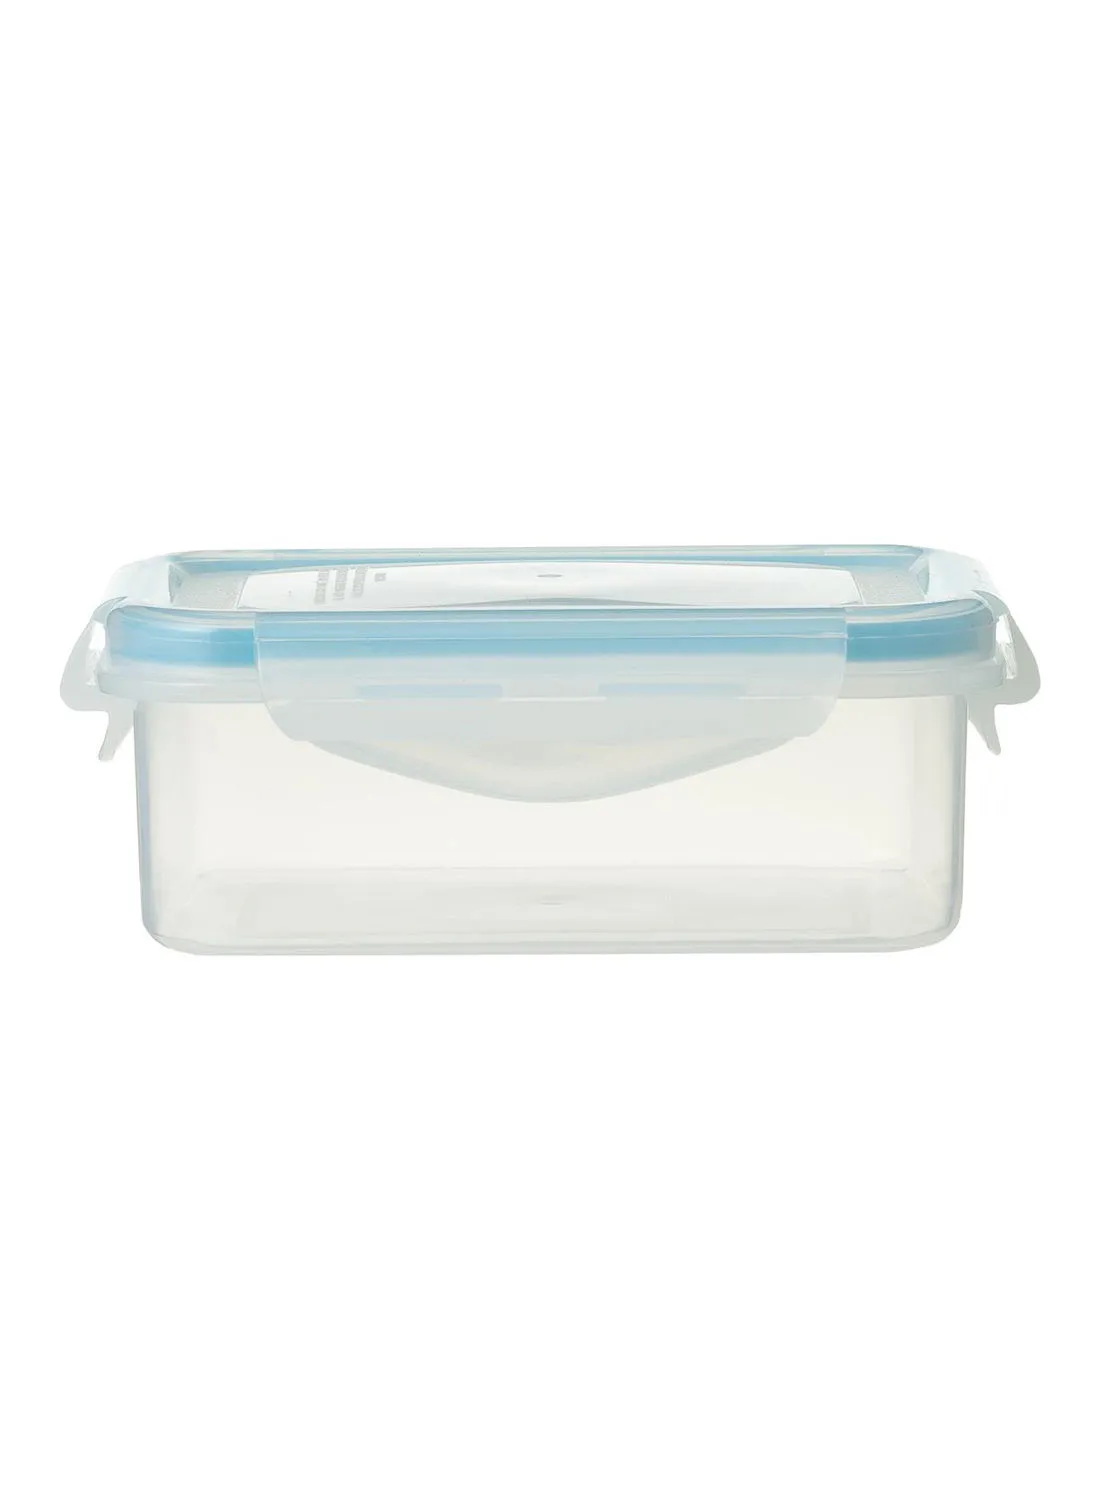 Hema Clip-Lock Food Container Clear 0.34L